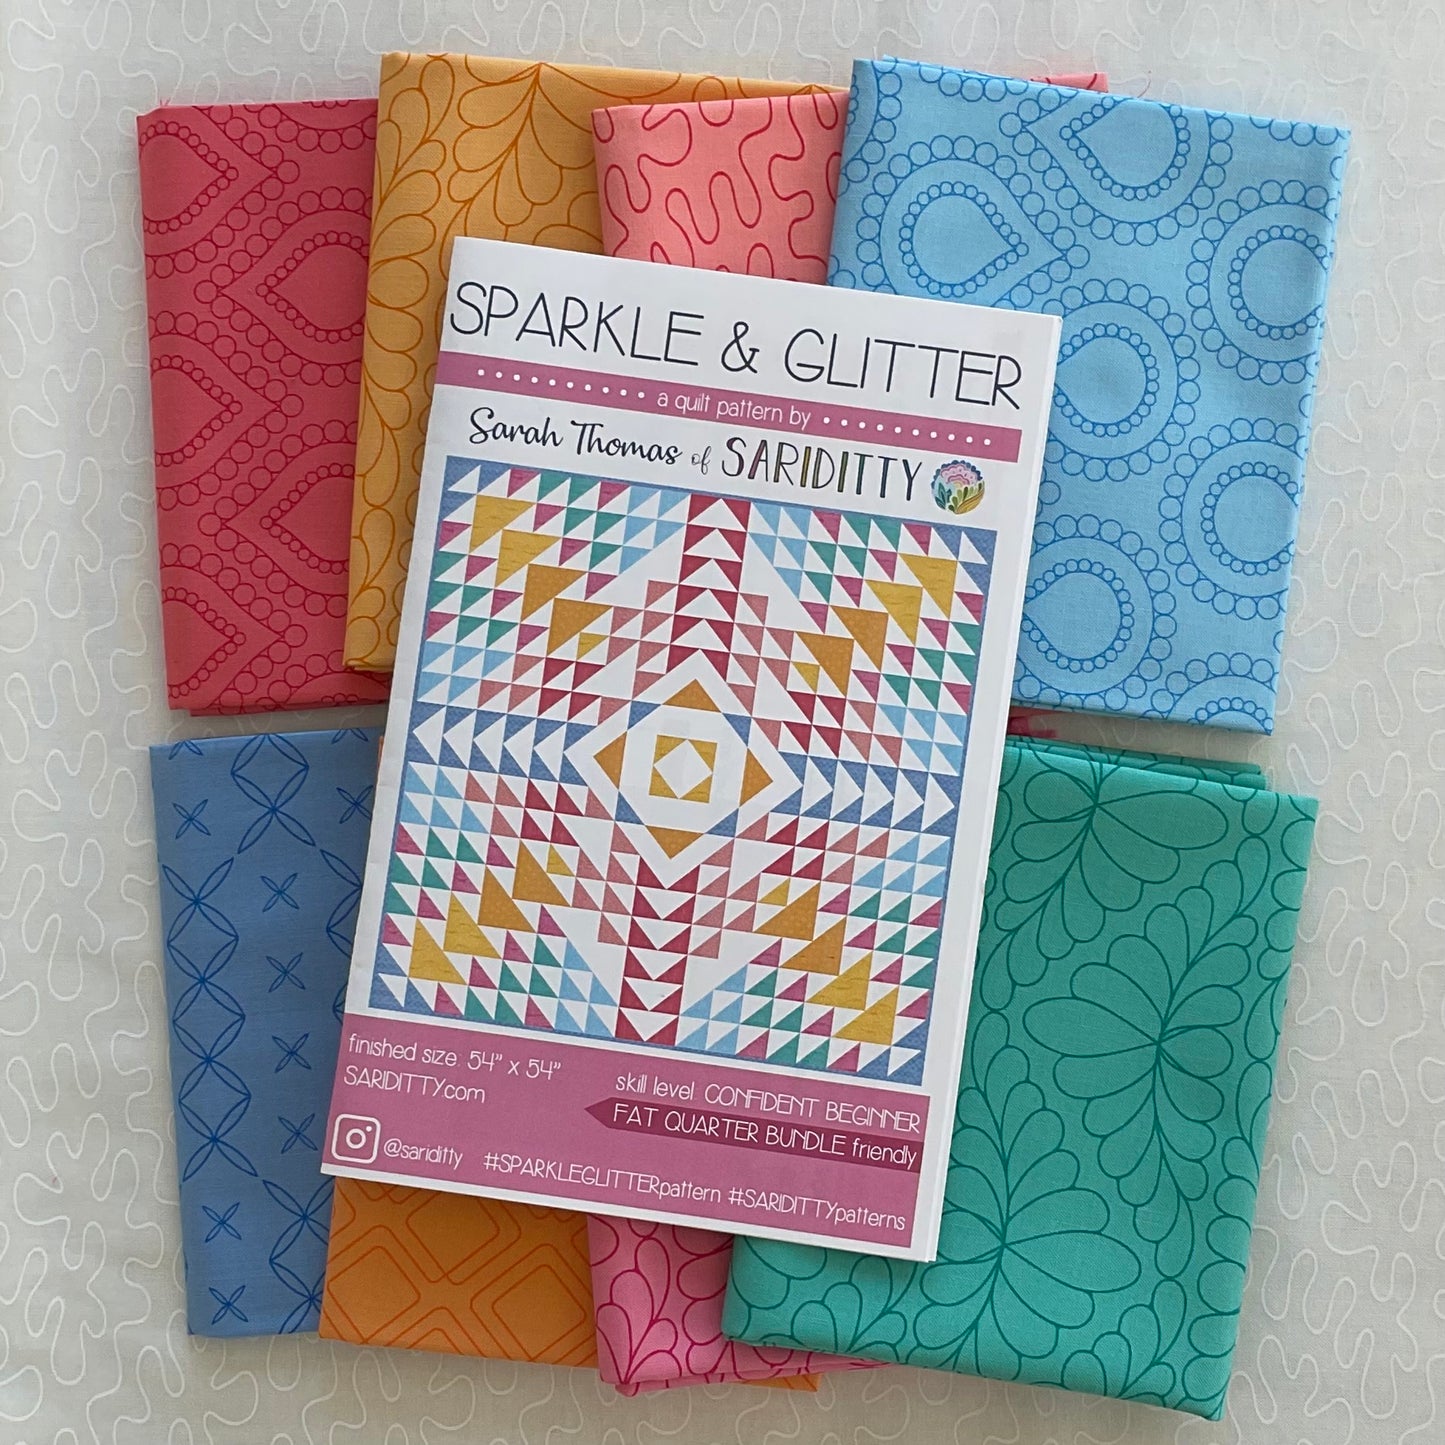 Sparkle & Glitter Quilt Kit featuring Rainbow Sherbet by Sariditty - Light Version